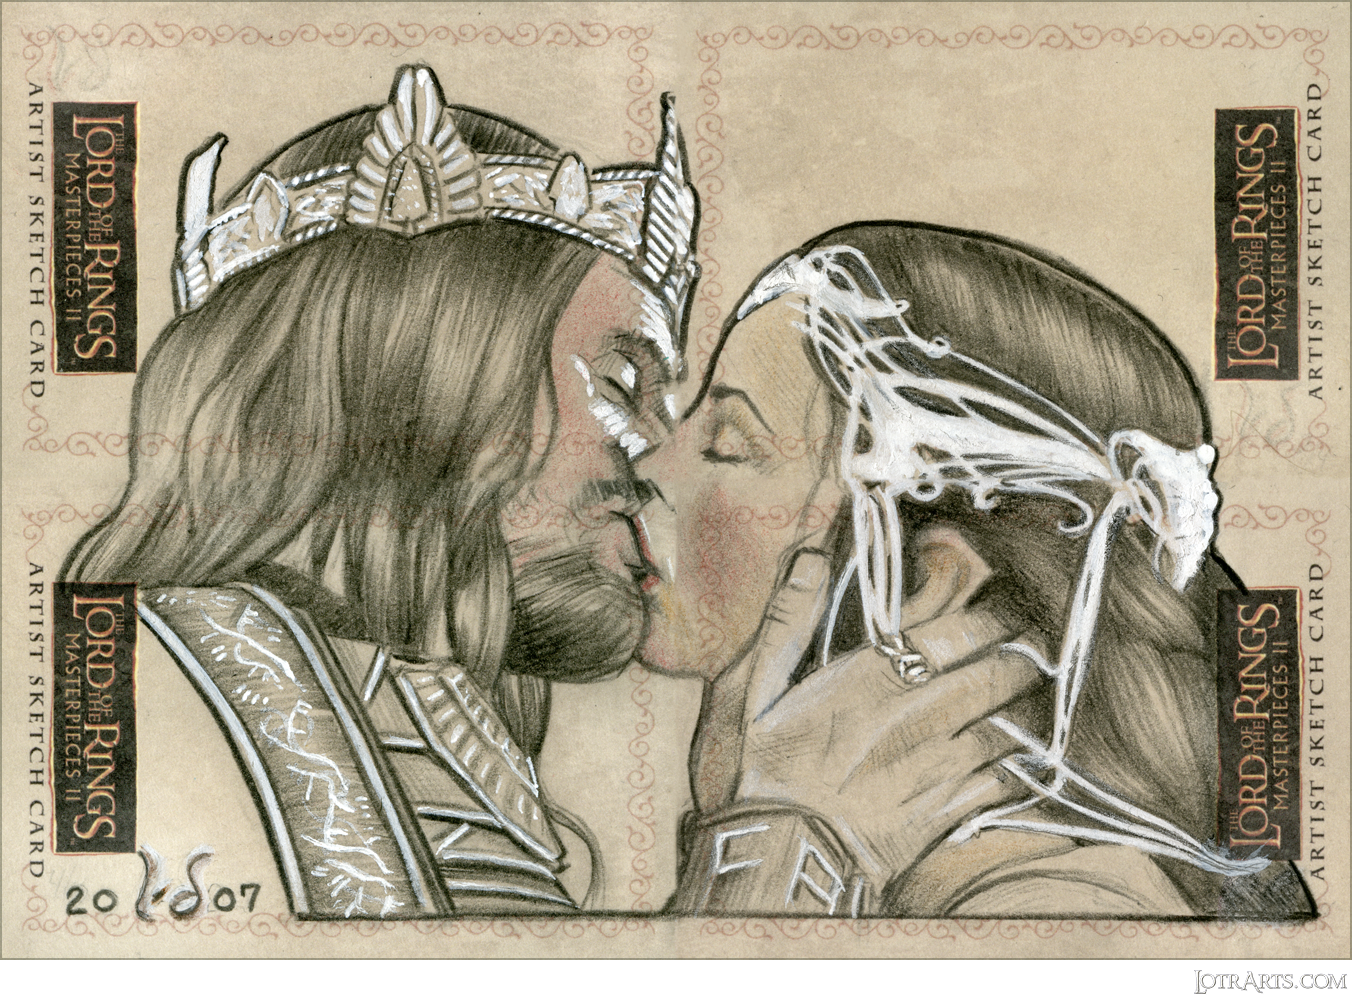 Aragorn and Arwen, four-card panel, by Doyle: artist return sketches<span class="ngViews">13 views</span>